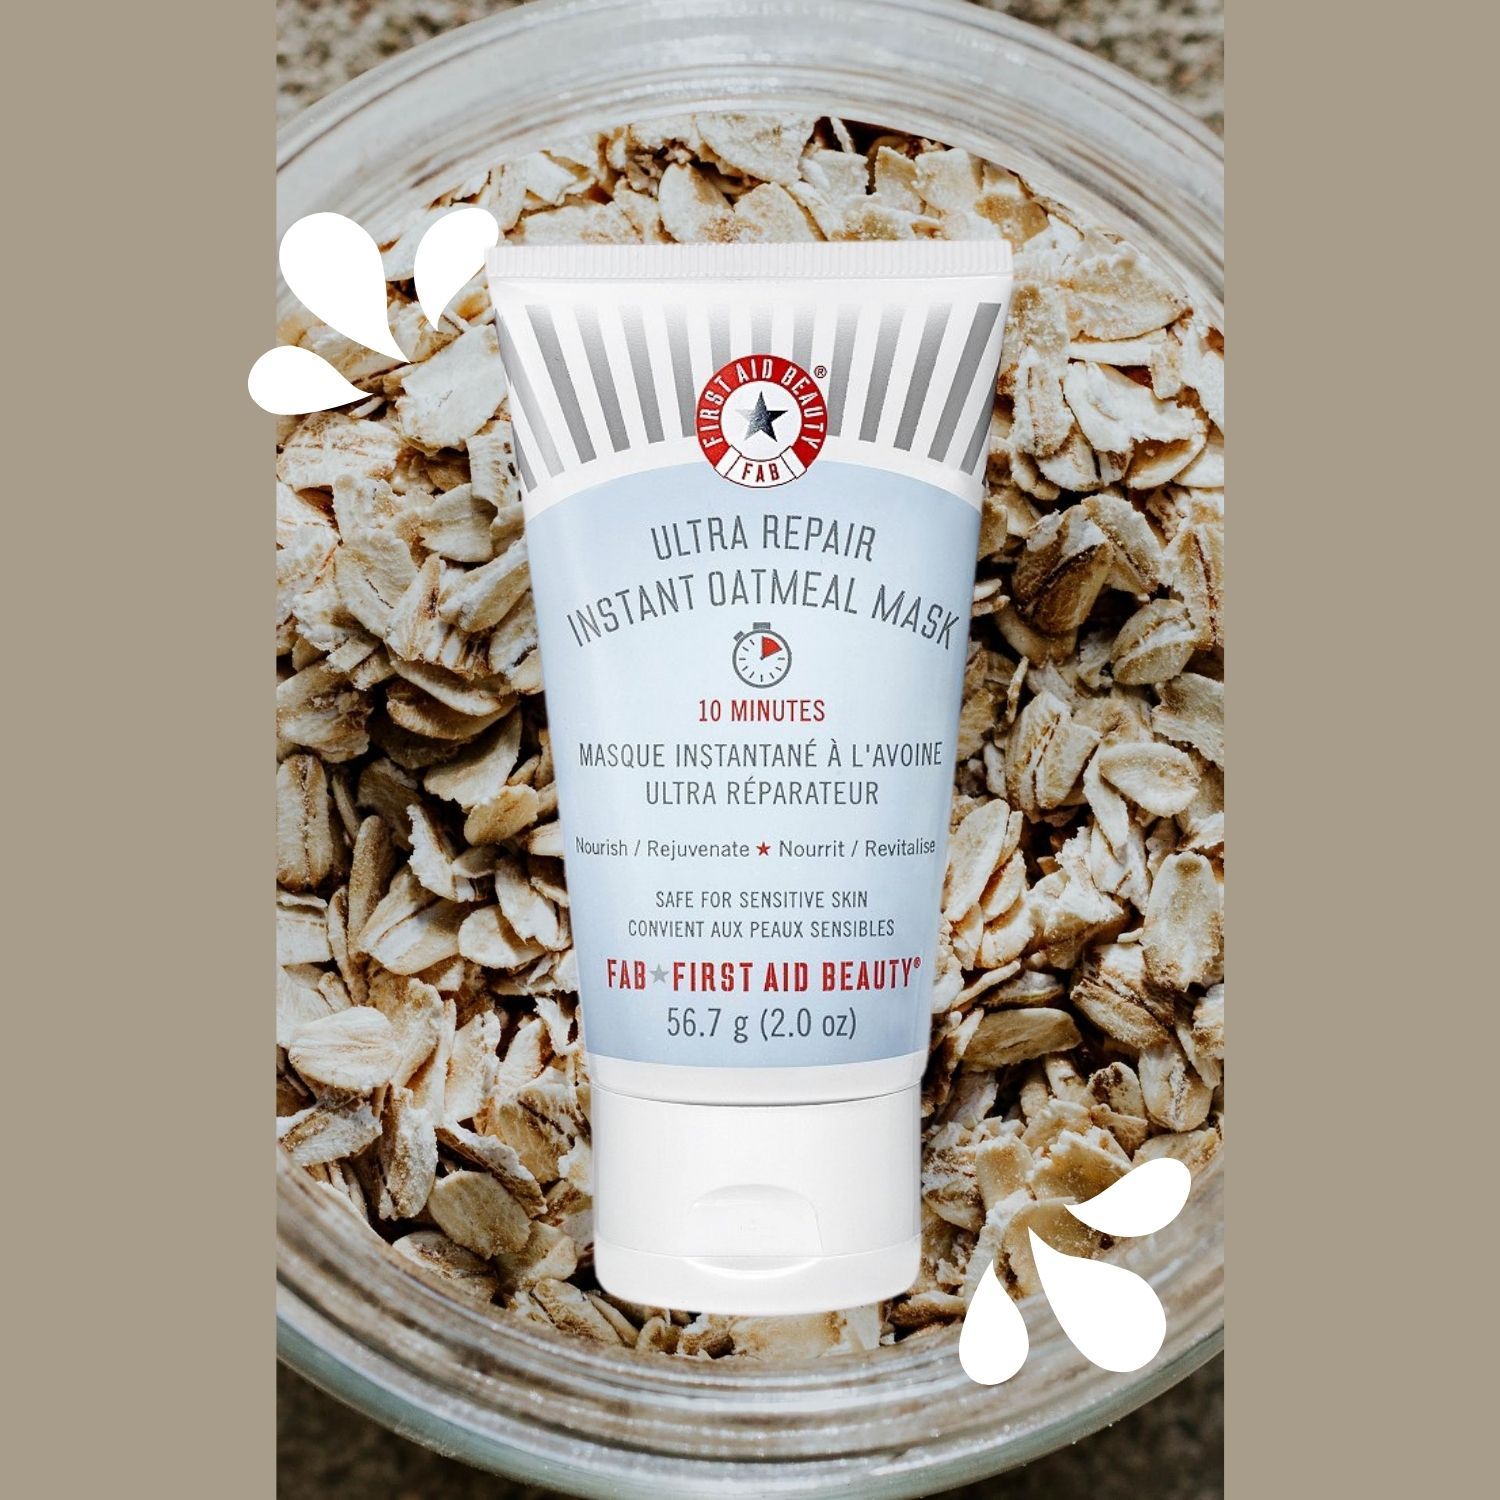 First Aid Beauty Ultra Repair Instant Oatmeal Mask ($24)